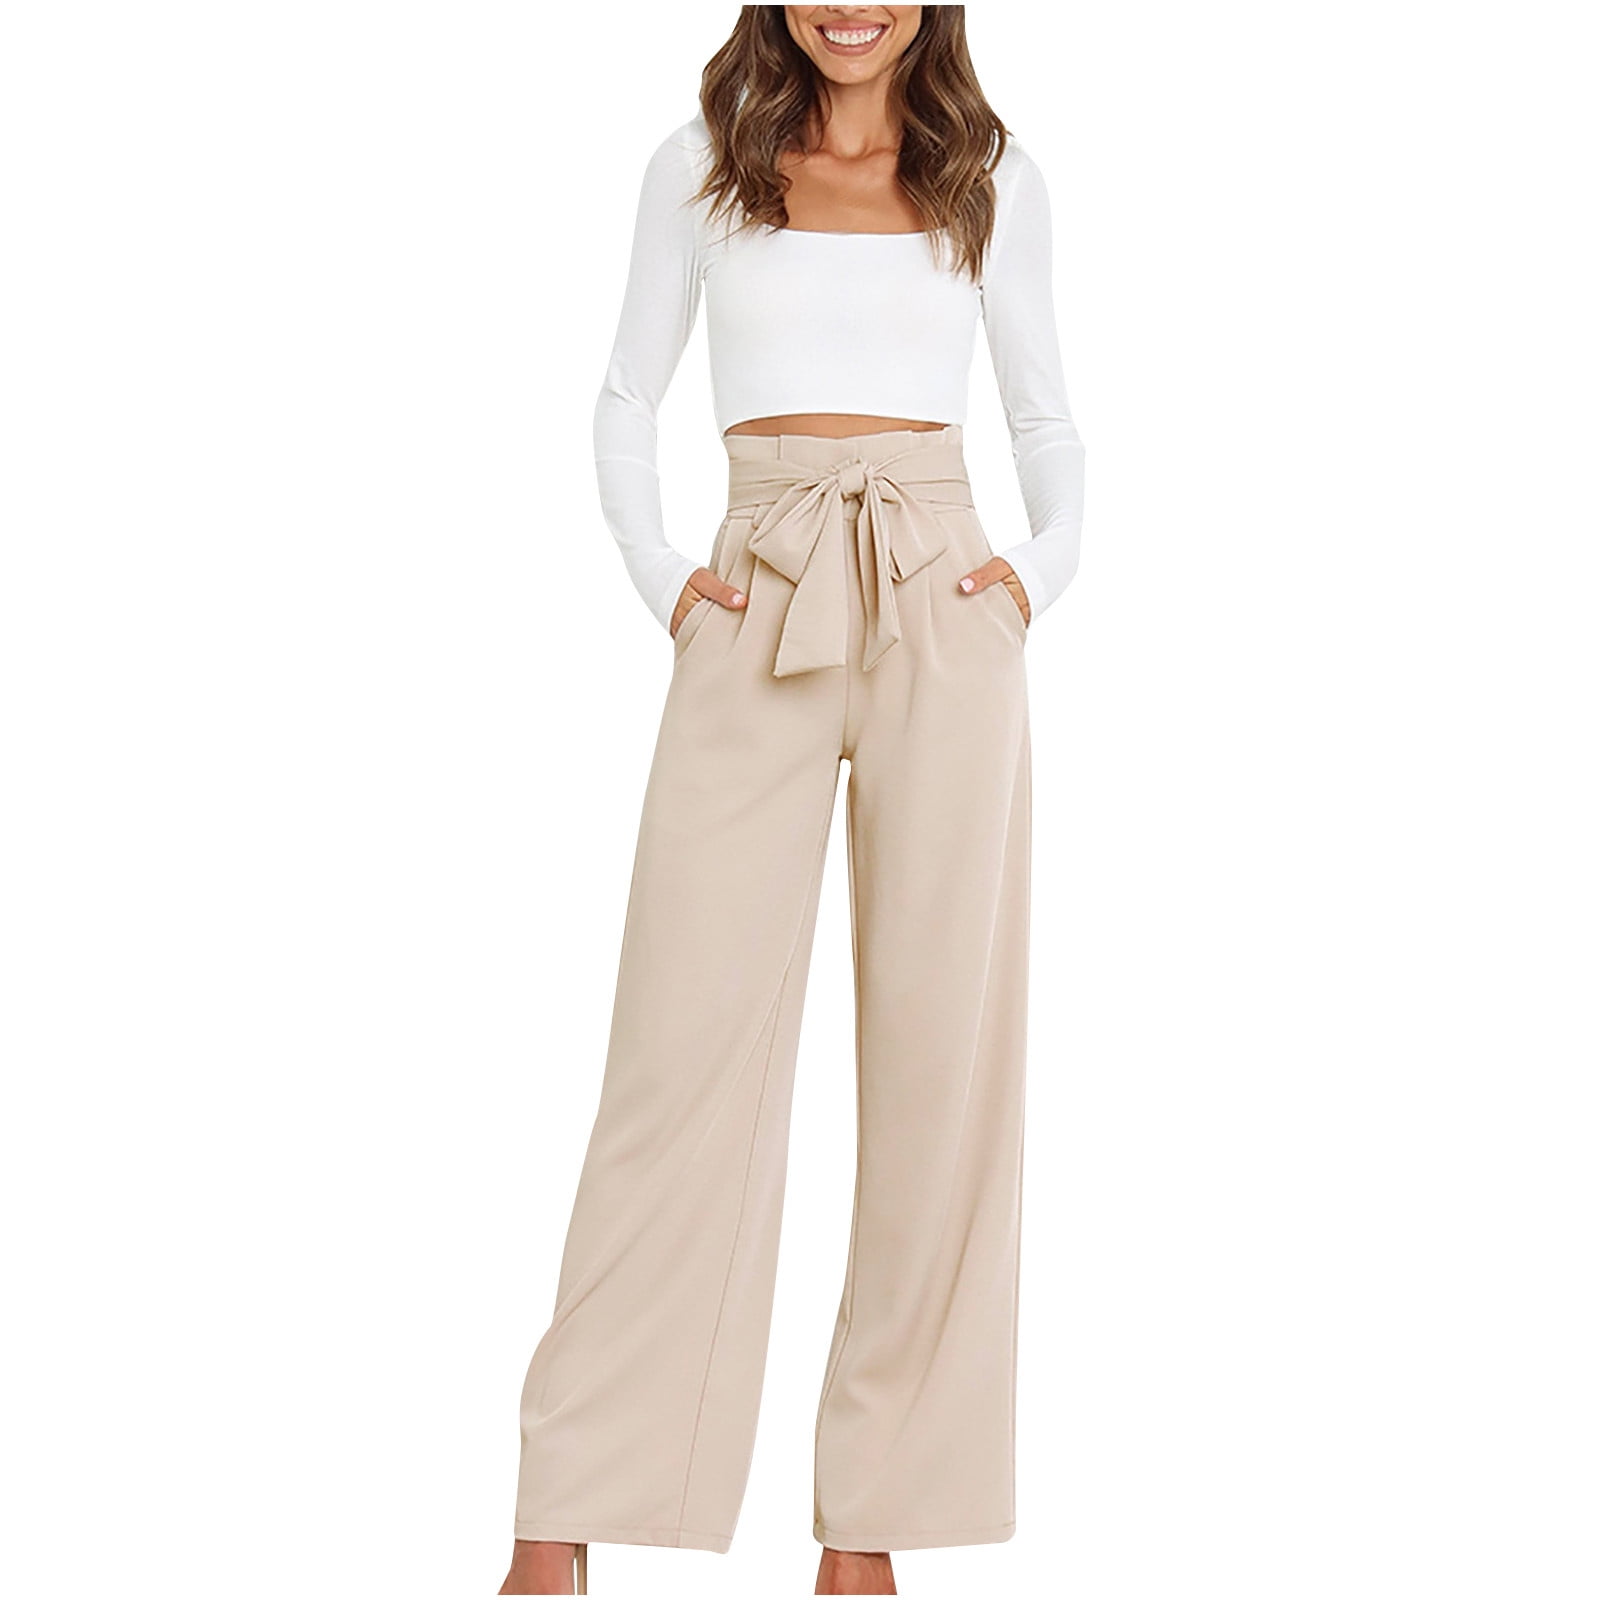 Mrat Womens Relaxed Fit Pants Full Length Pants Ladies Slim Fit Flare Solid  Suit Pants Leisure Trousers Bell-bottoms Solid Color Pants Female Pants